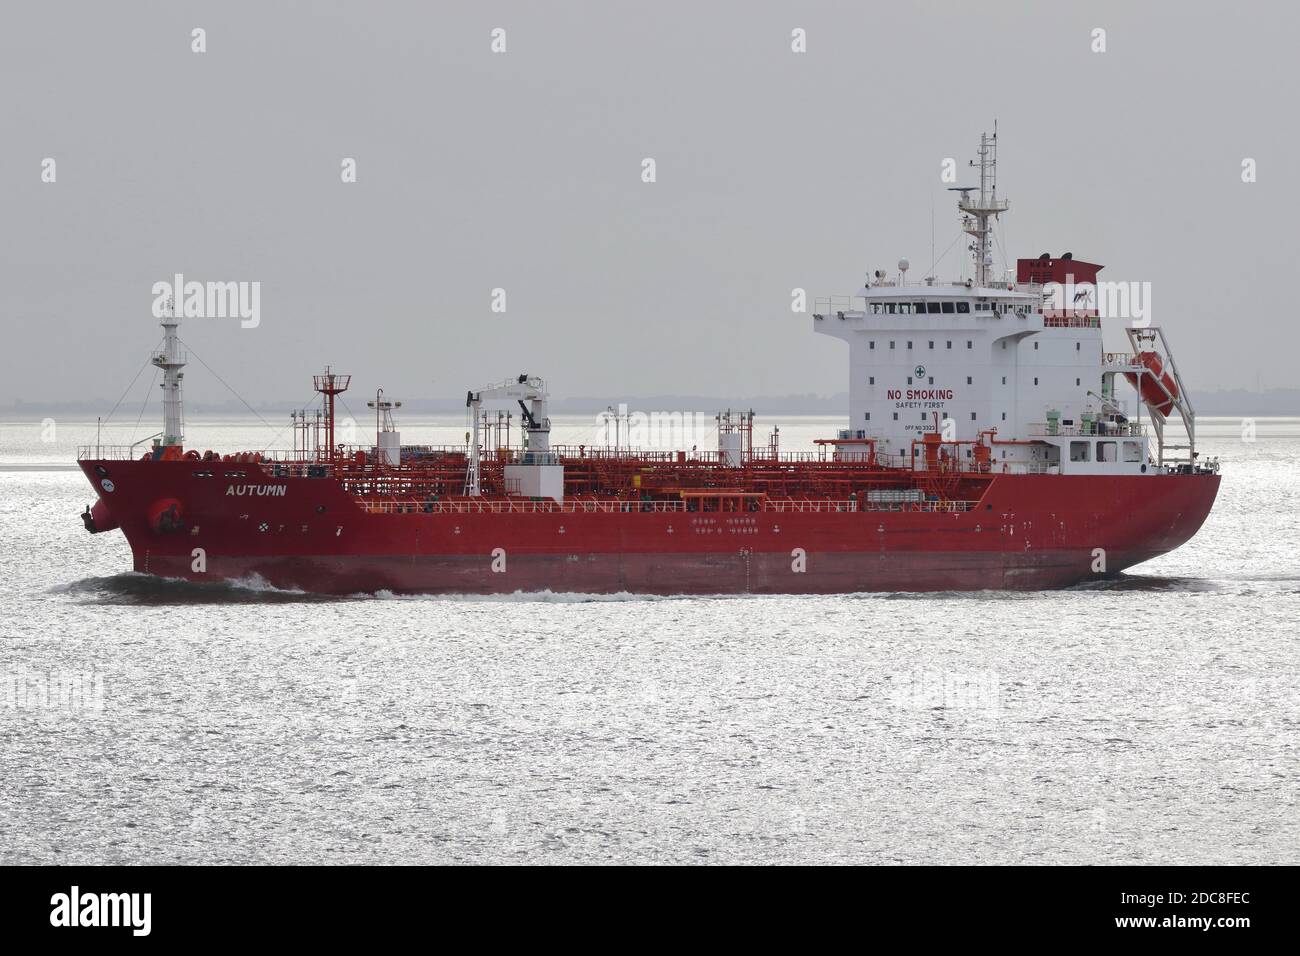 The tanker Autumn will pass Cuxhaven on August 22, 2020 on its way to the North Sea. Stock Photo